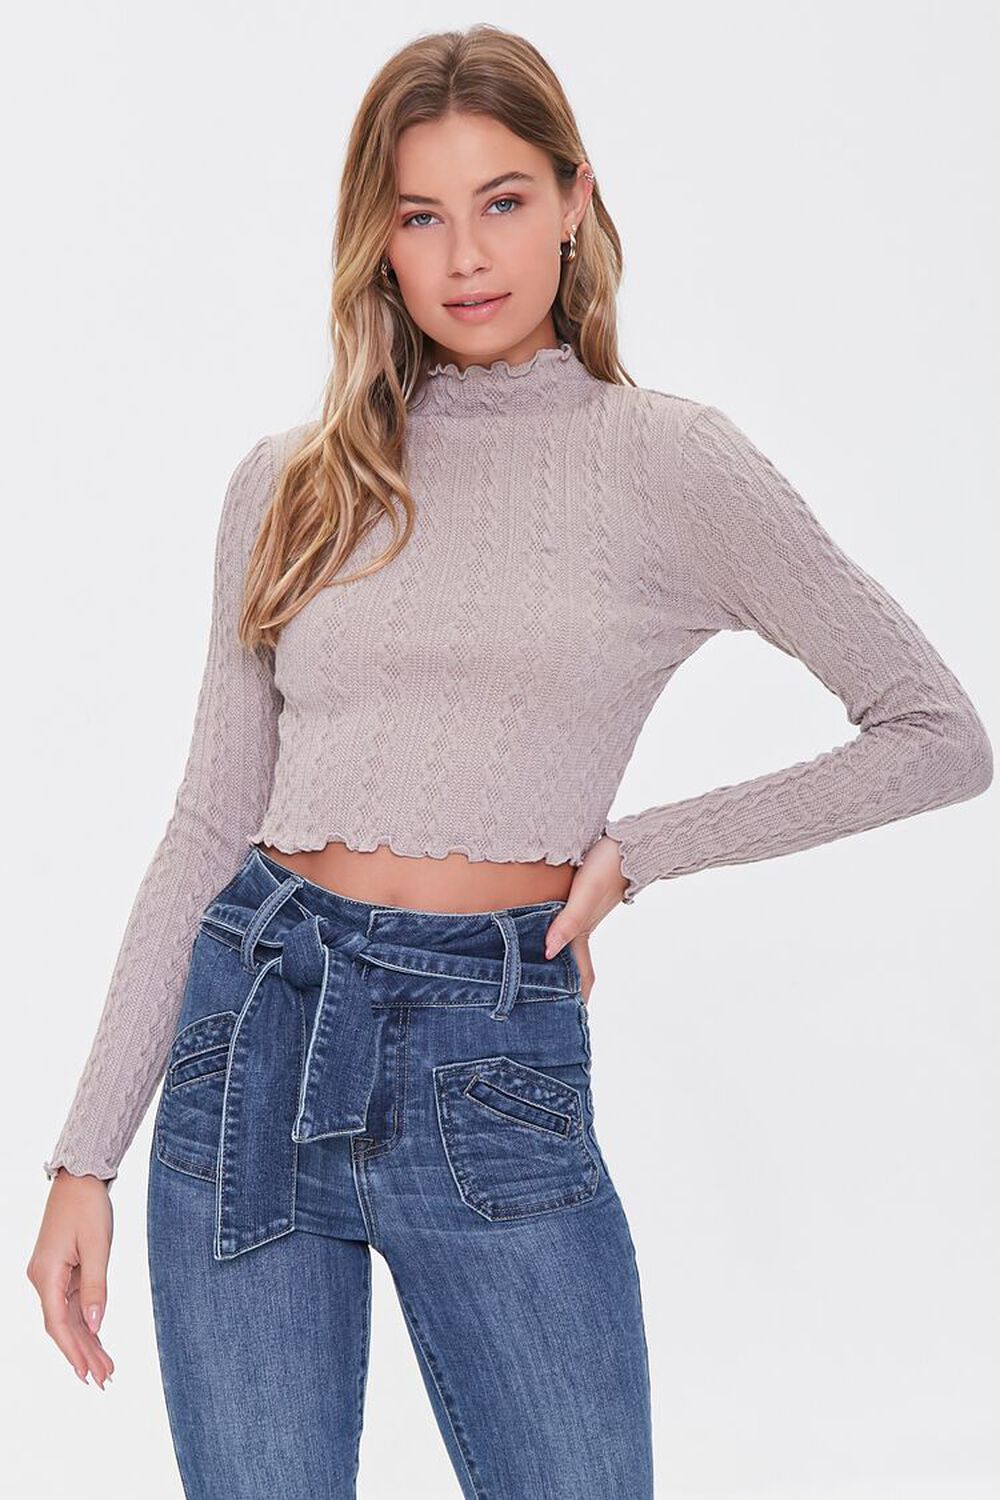 TAUPE Cable Knit Mock Neck Crop Top, image 1